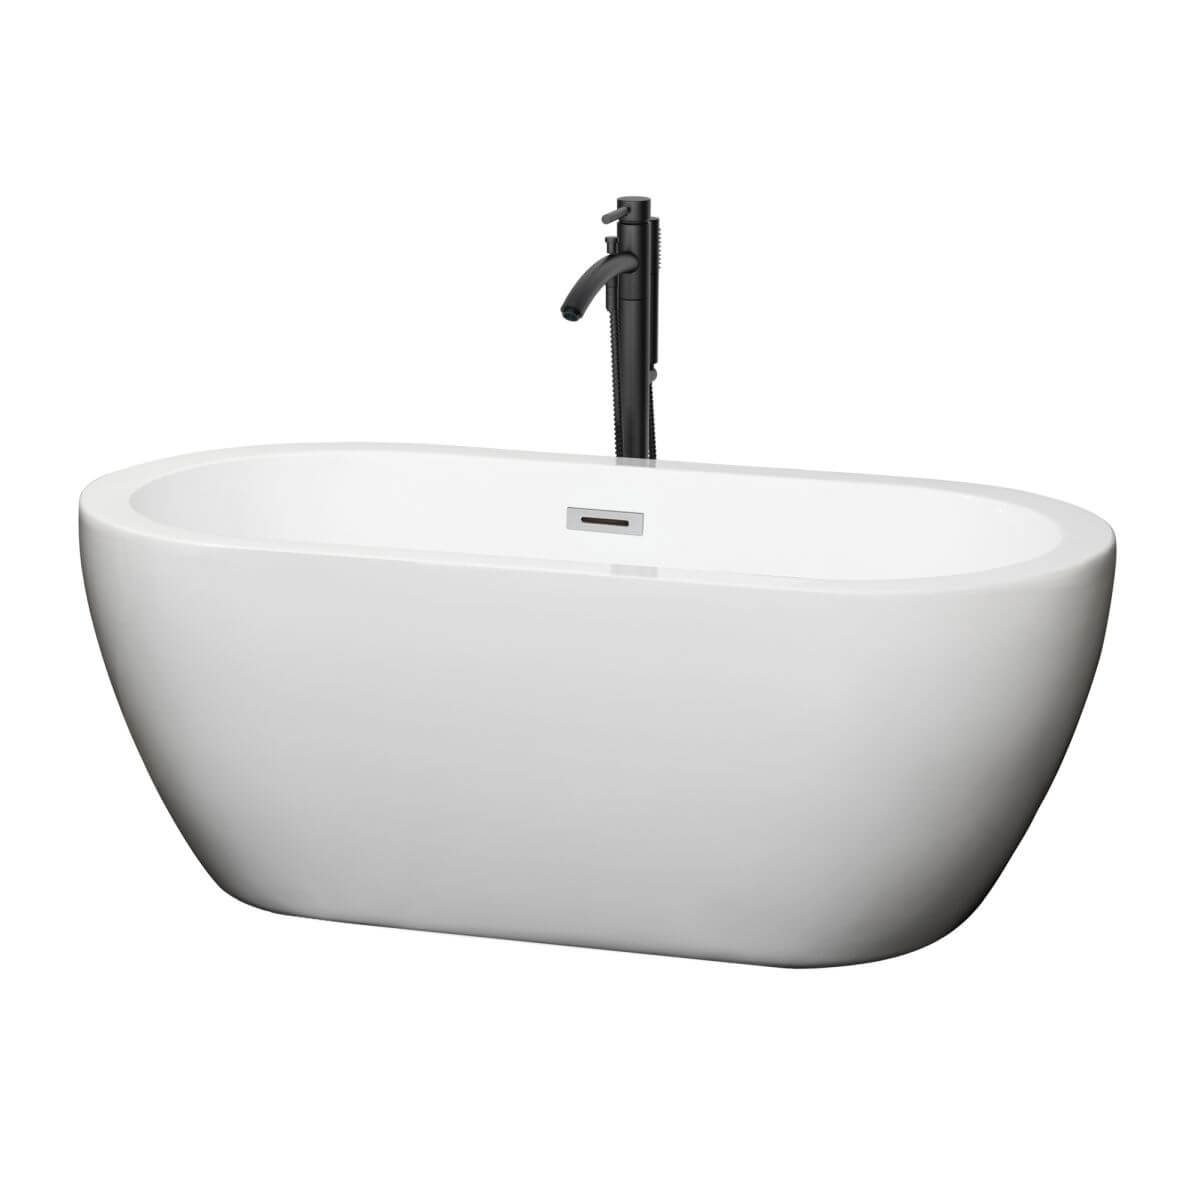 Wyndham Collection Soho 60 inch Freestanding Bathtub in White with Polished Chrome Trim and Floor Mounted Faucet in Matte Black - WCOBT100260PCATPBK